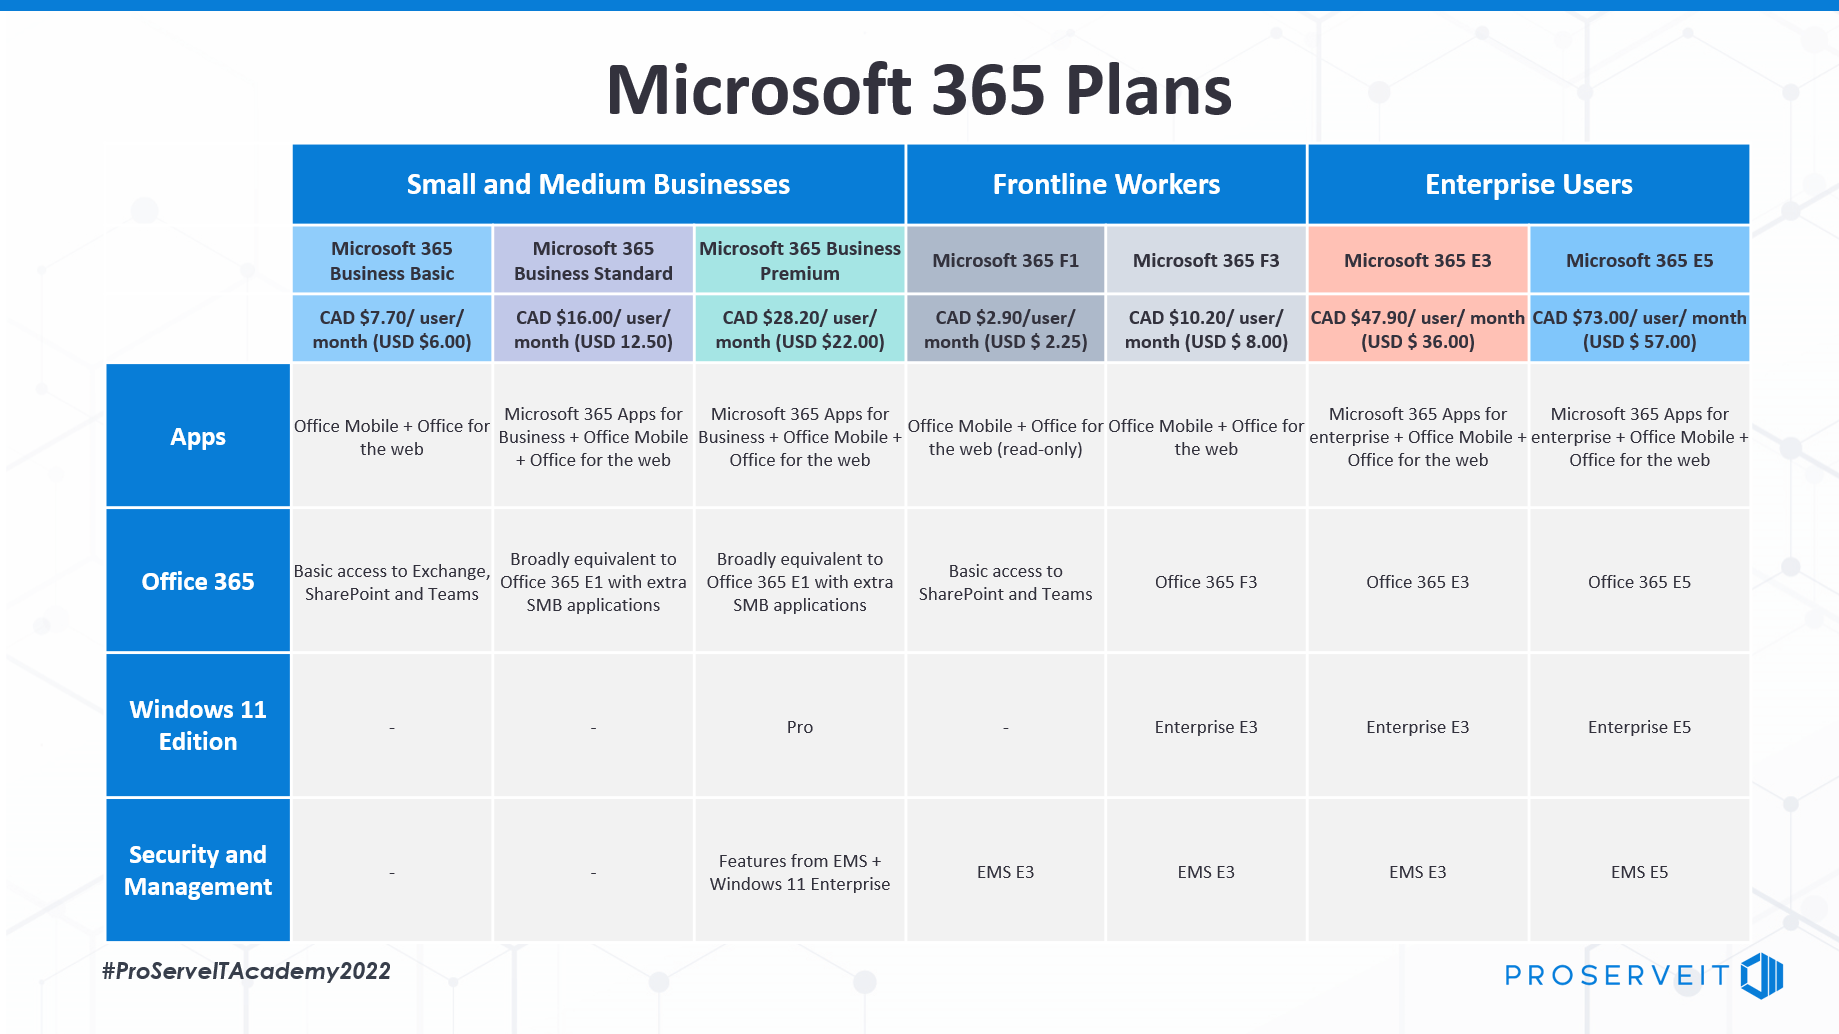 Microsoft 365 plans explained in a comparison table